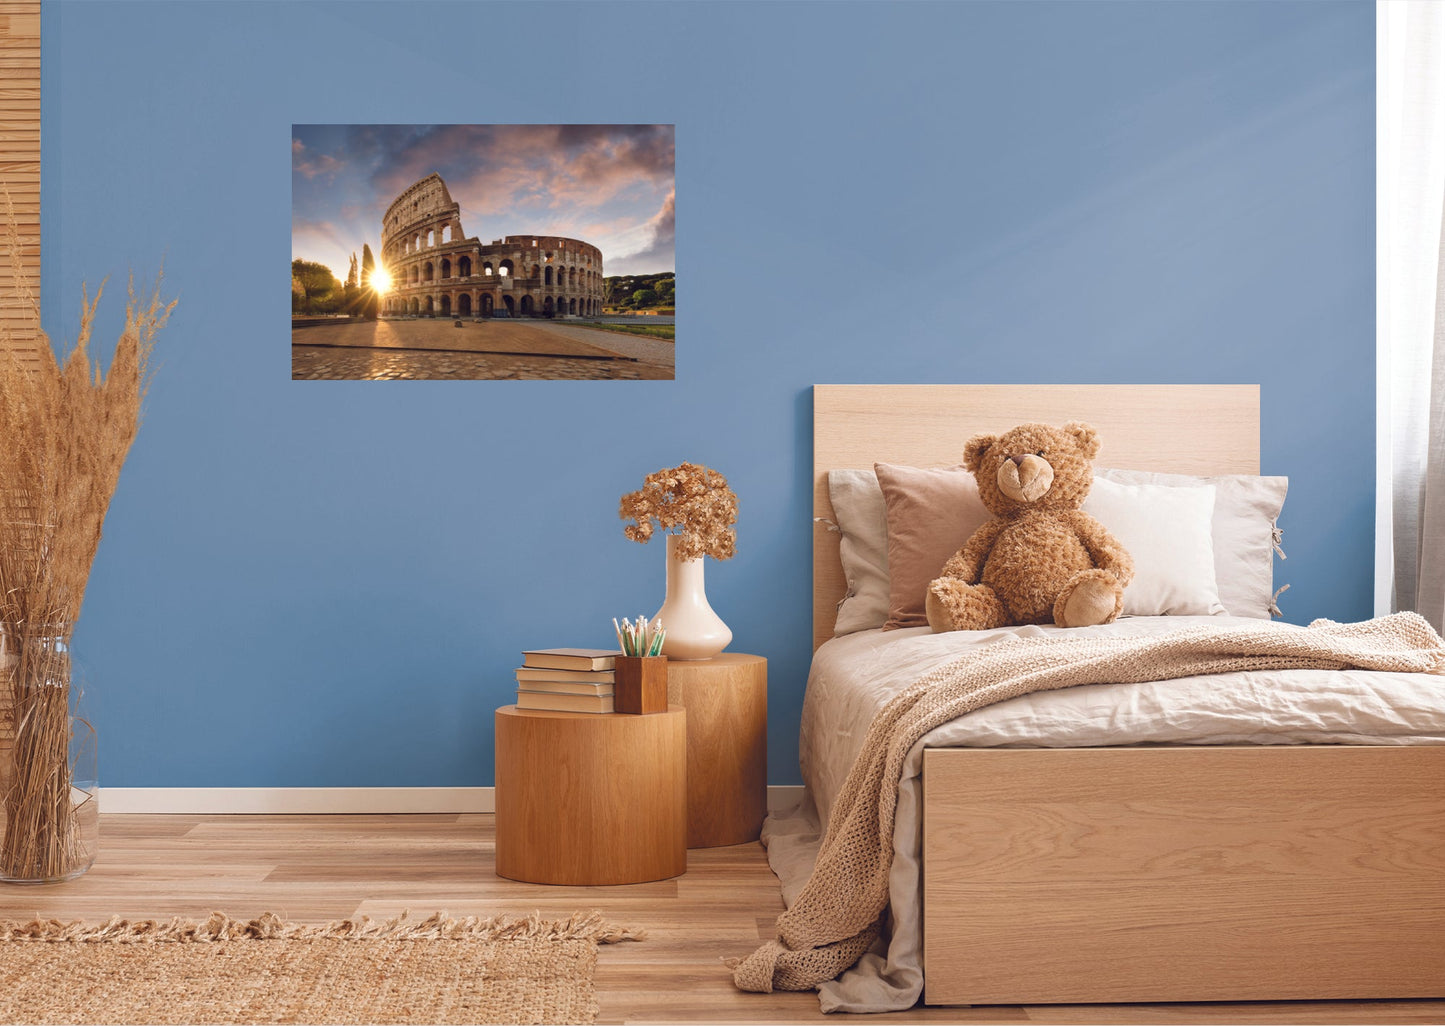 Popular Landmarks: Rome Coloseum Realistic Poster - Removable Adhesive Decal